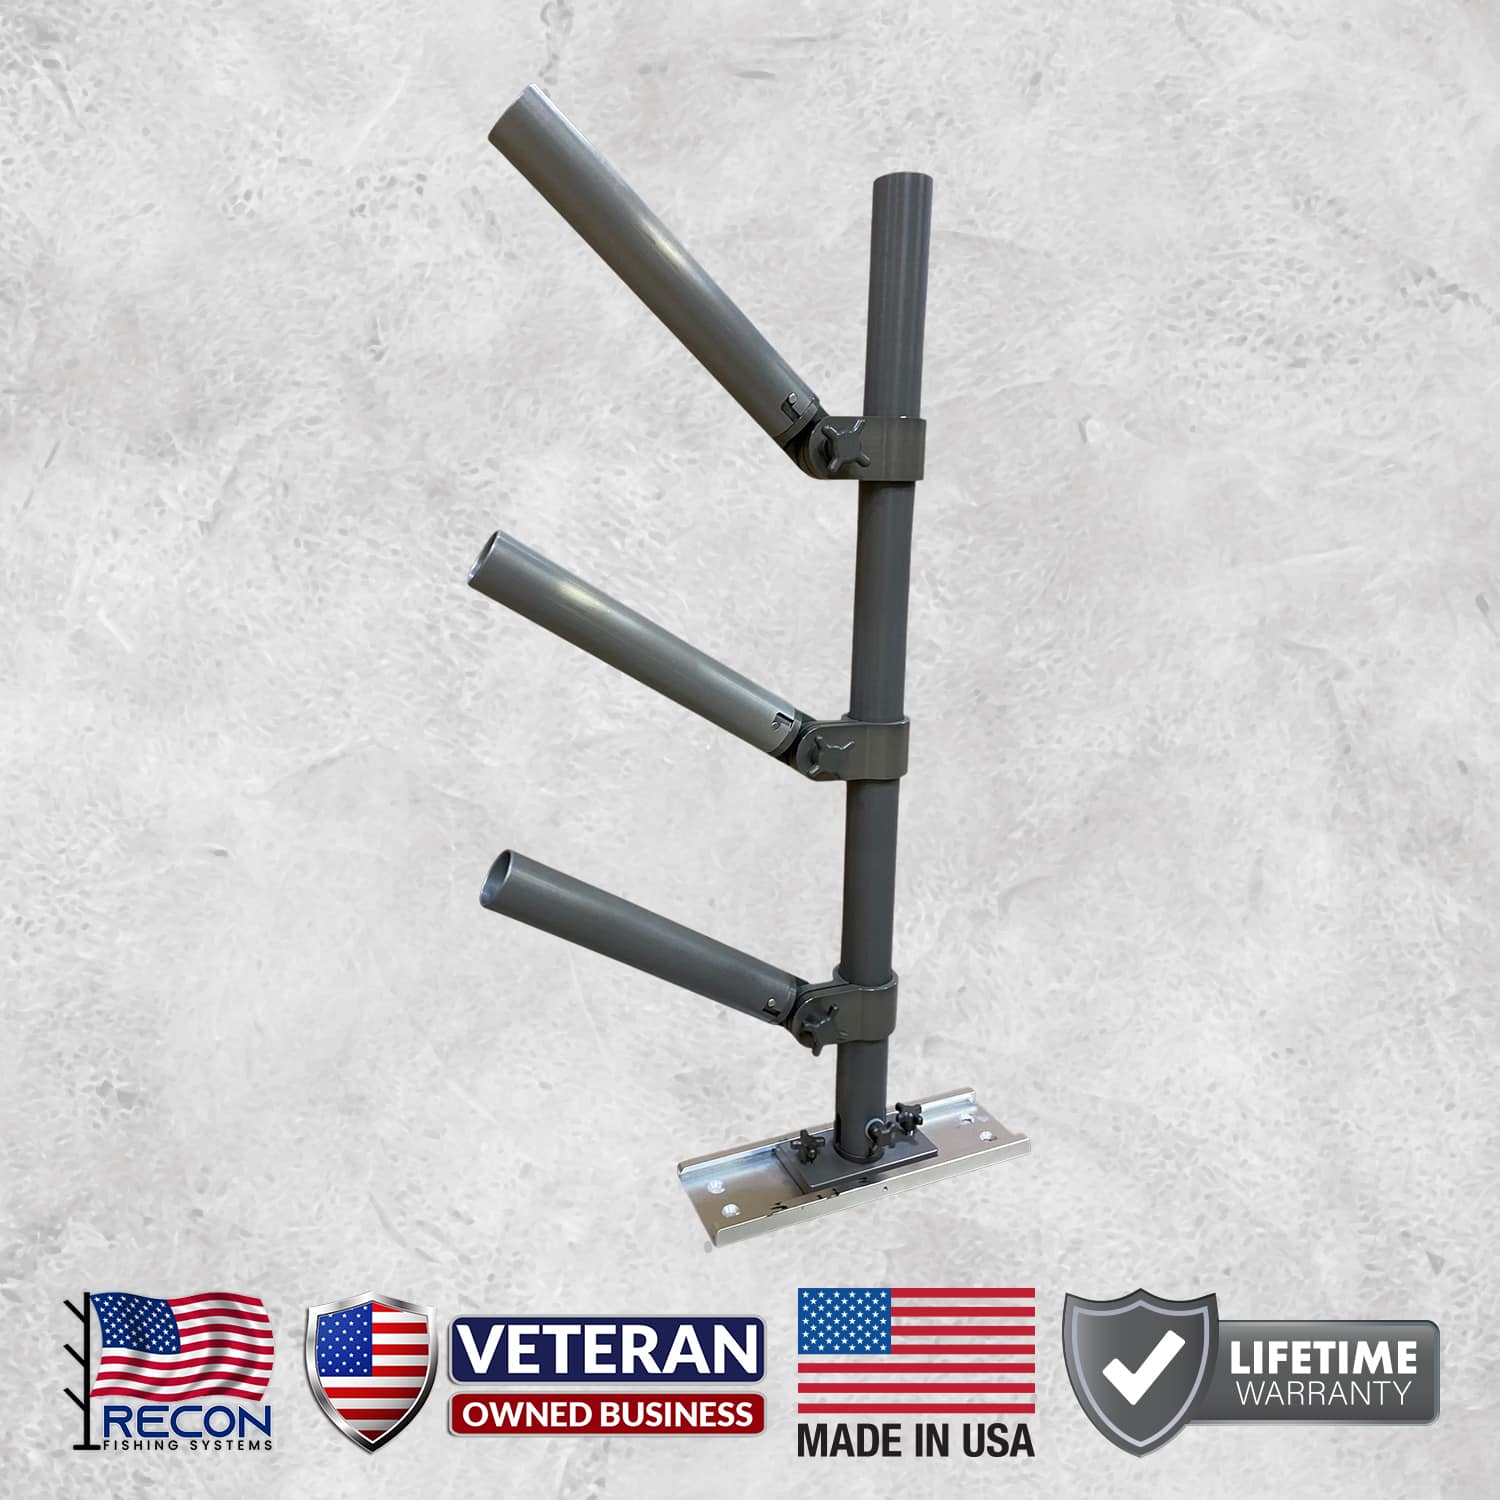 30" Adjustable Rod Tree - Only available in Hard Coat Anodized (Color: Gunmetal Gray)